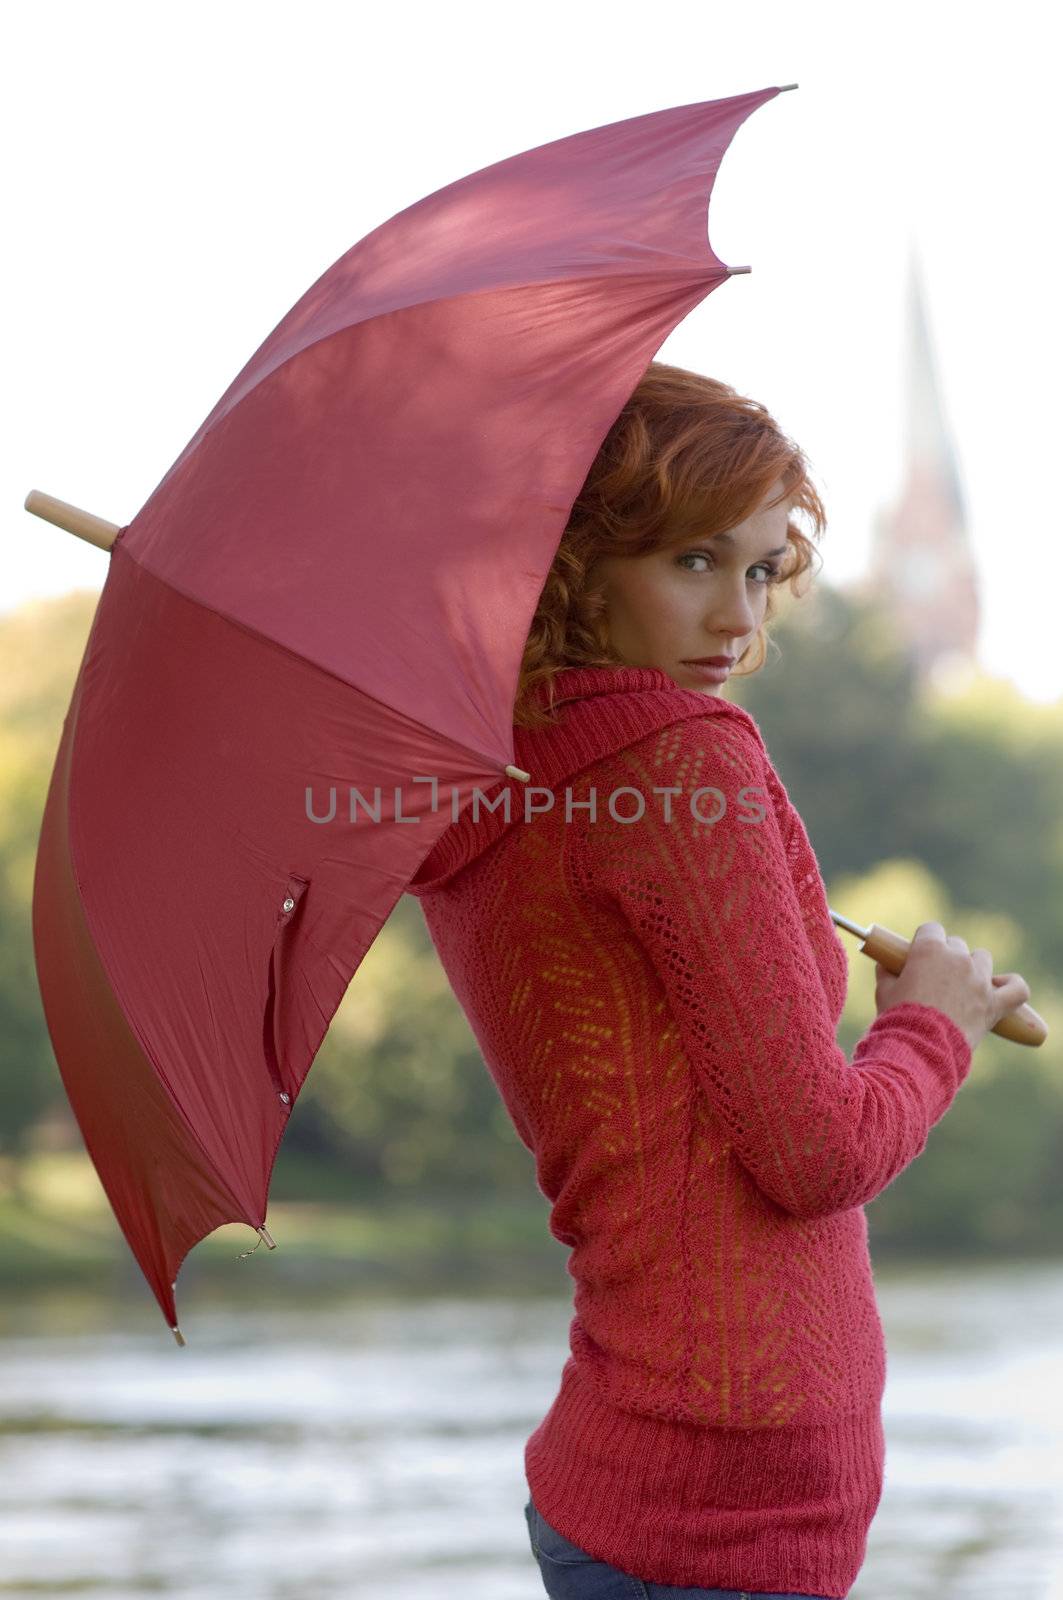 nice portrait of cute woman with hair pullover and umbrella in red color